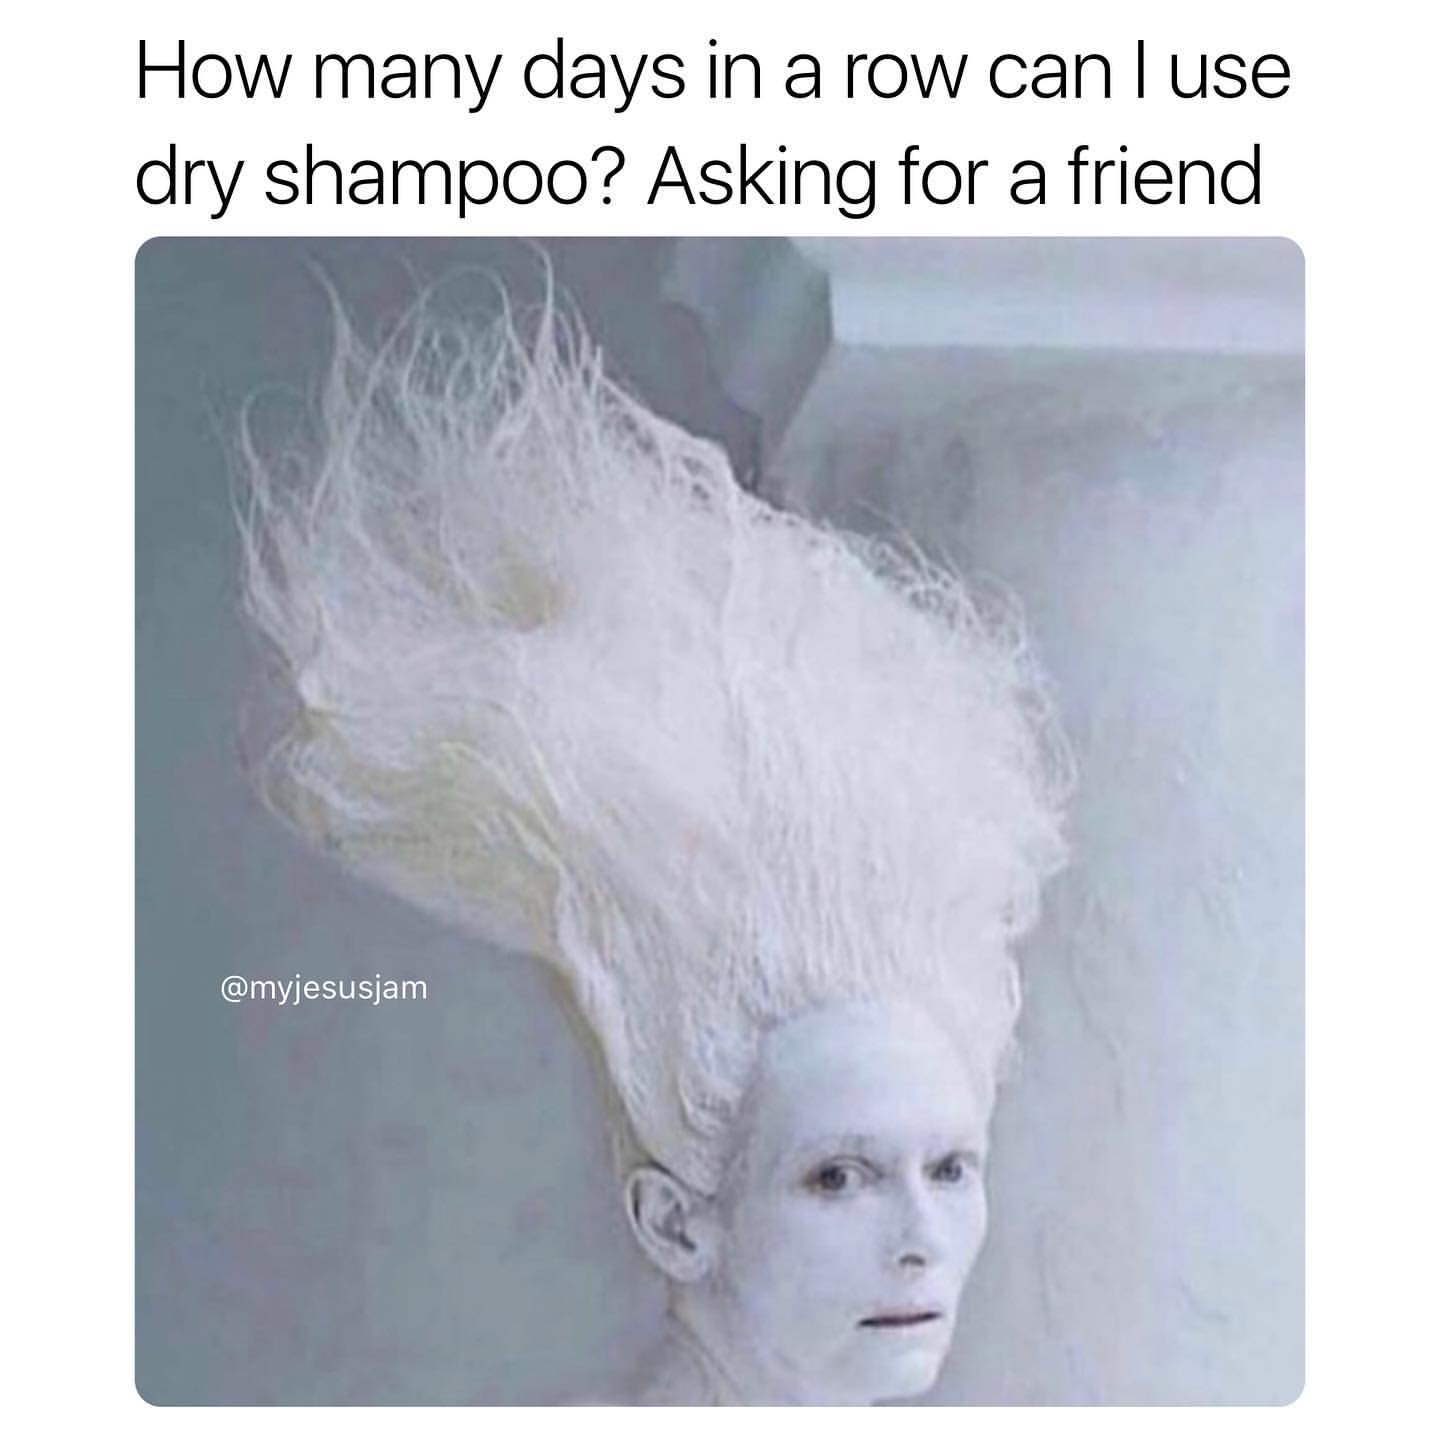 How many days in a row can I use dry shampoo? Asking for a friend.